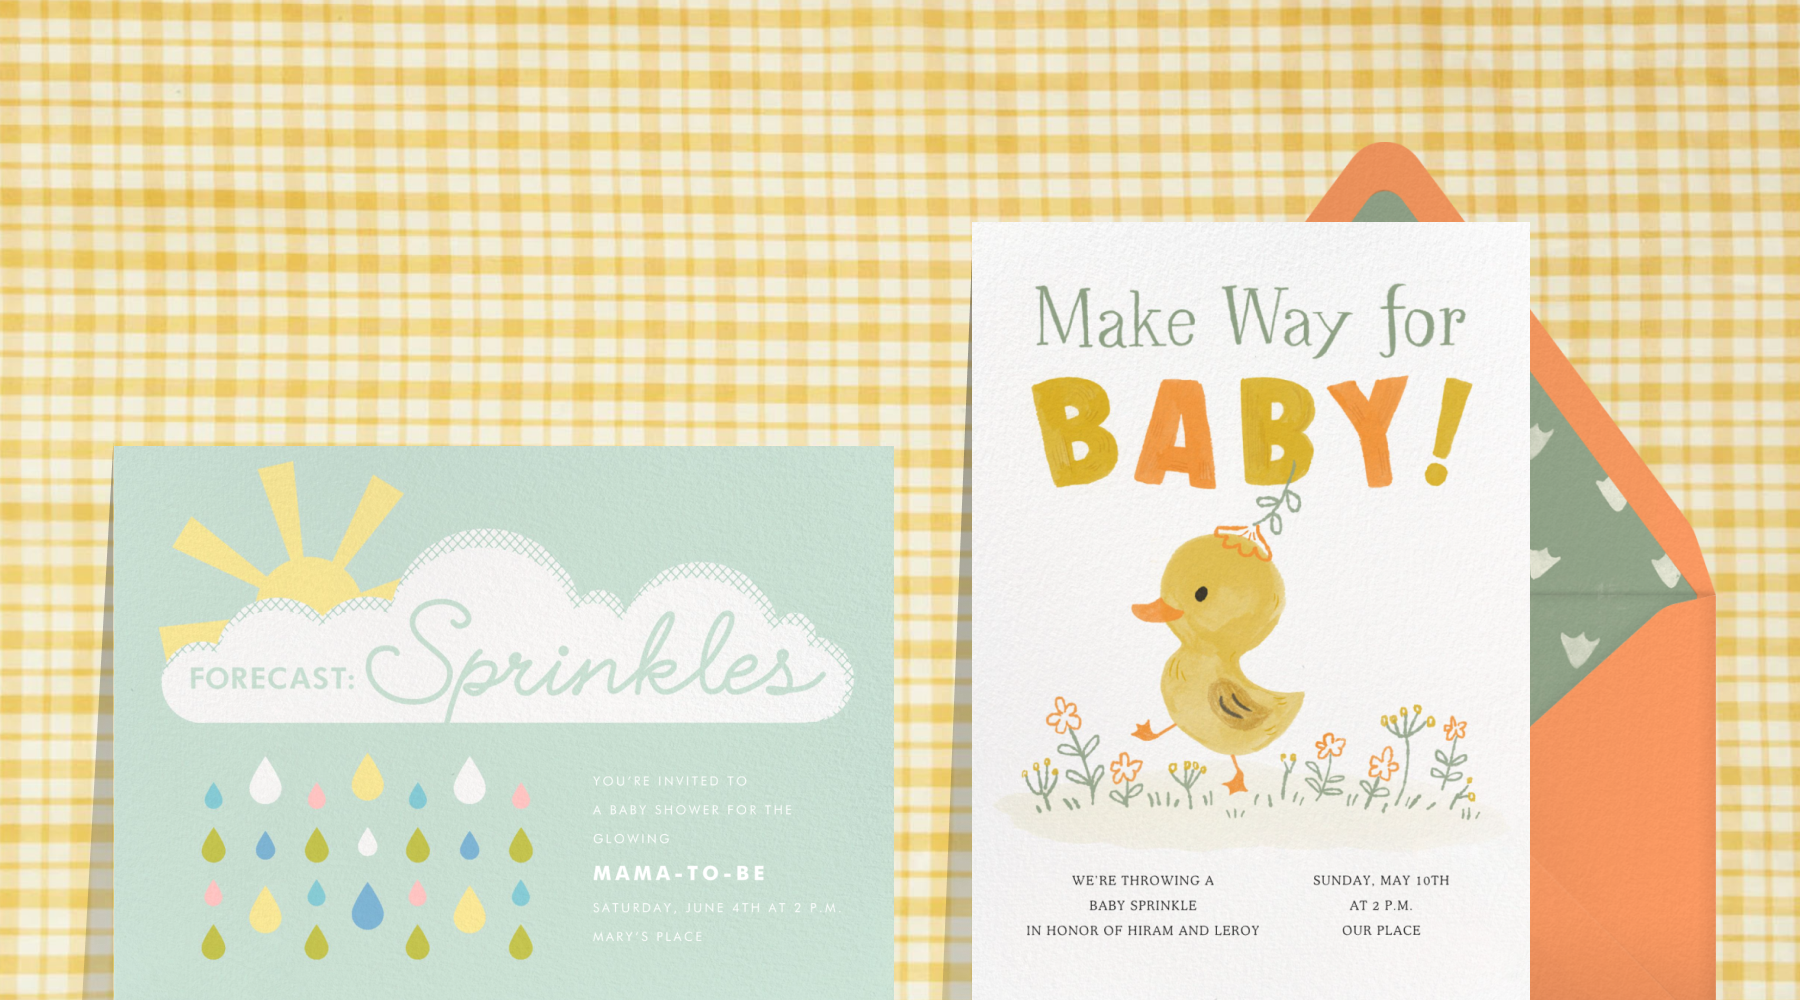 A light blue invitation with a cloud, sun, and water droplets reads ‘forecast: sprinkles;’ an invitation with a duckling reads ‘make way for baby’ with an orange envelope.